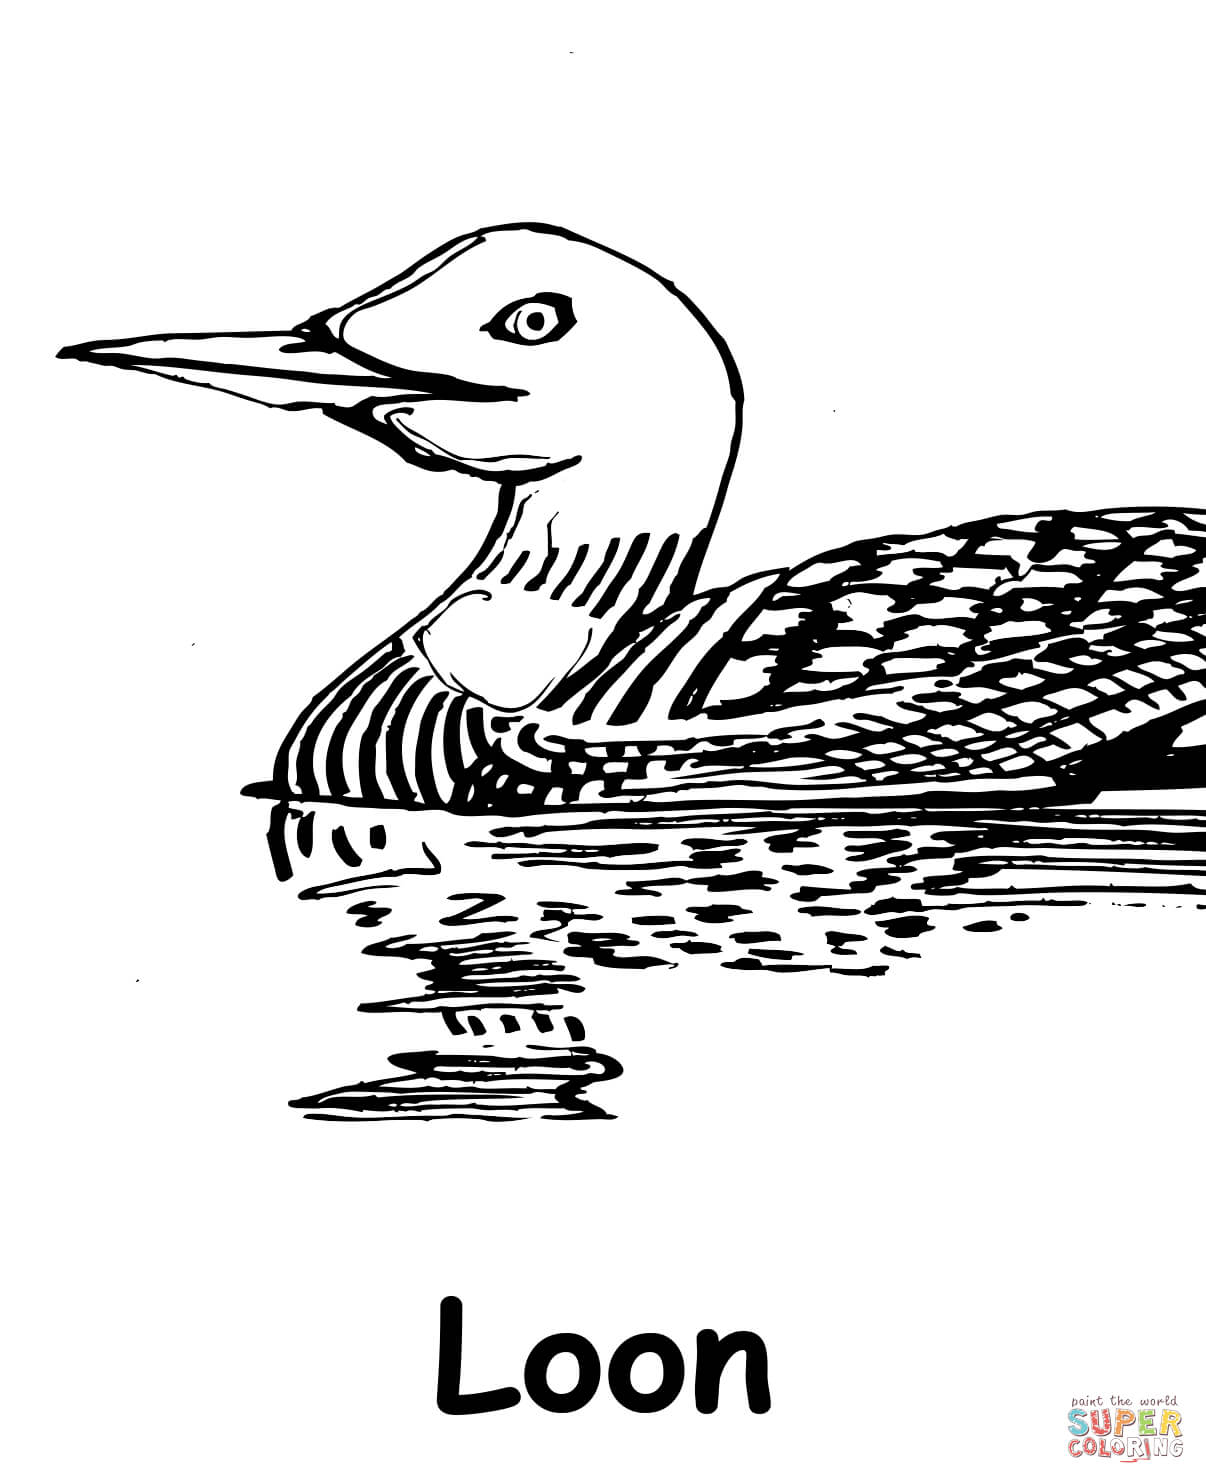 Loon coloring page free printable coloring pages